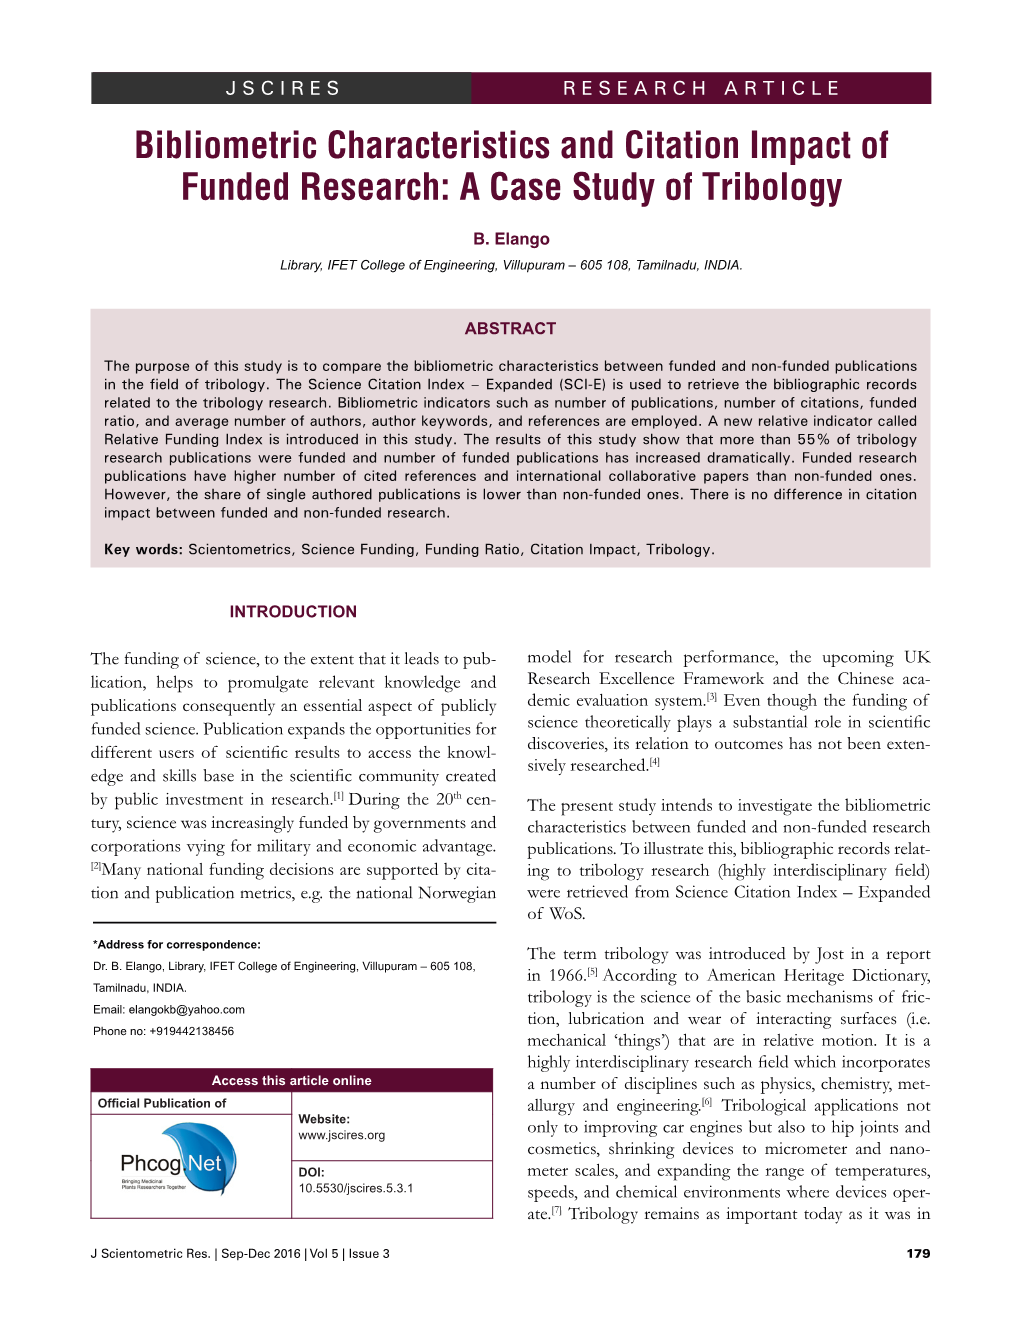 Bibliometric Characteristics and Citation Impact of Funded Research: a Case Study of Tribology